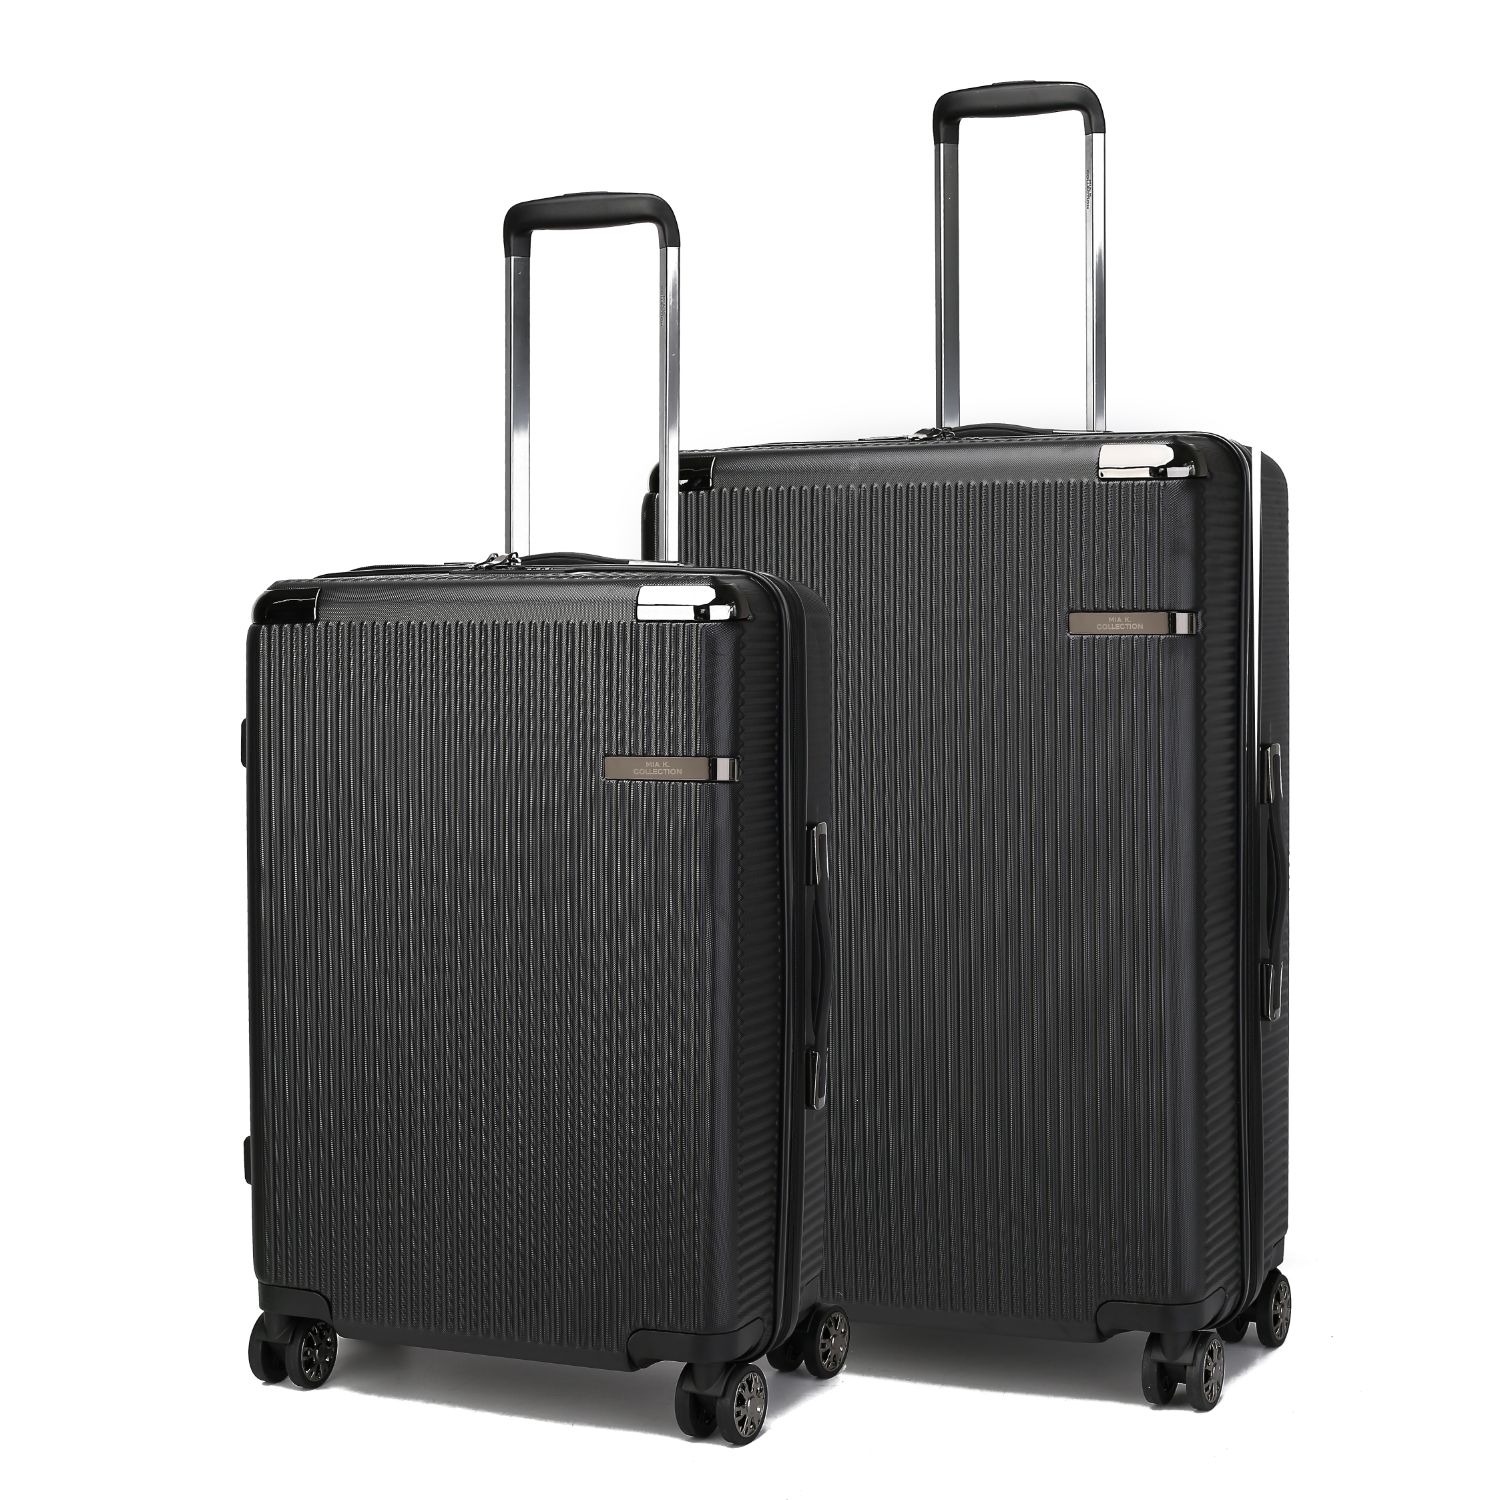 MKF Collection Tulum Luggage Set Extra Large And Large By Mia K- 2 Pieces - Rose Gold